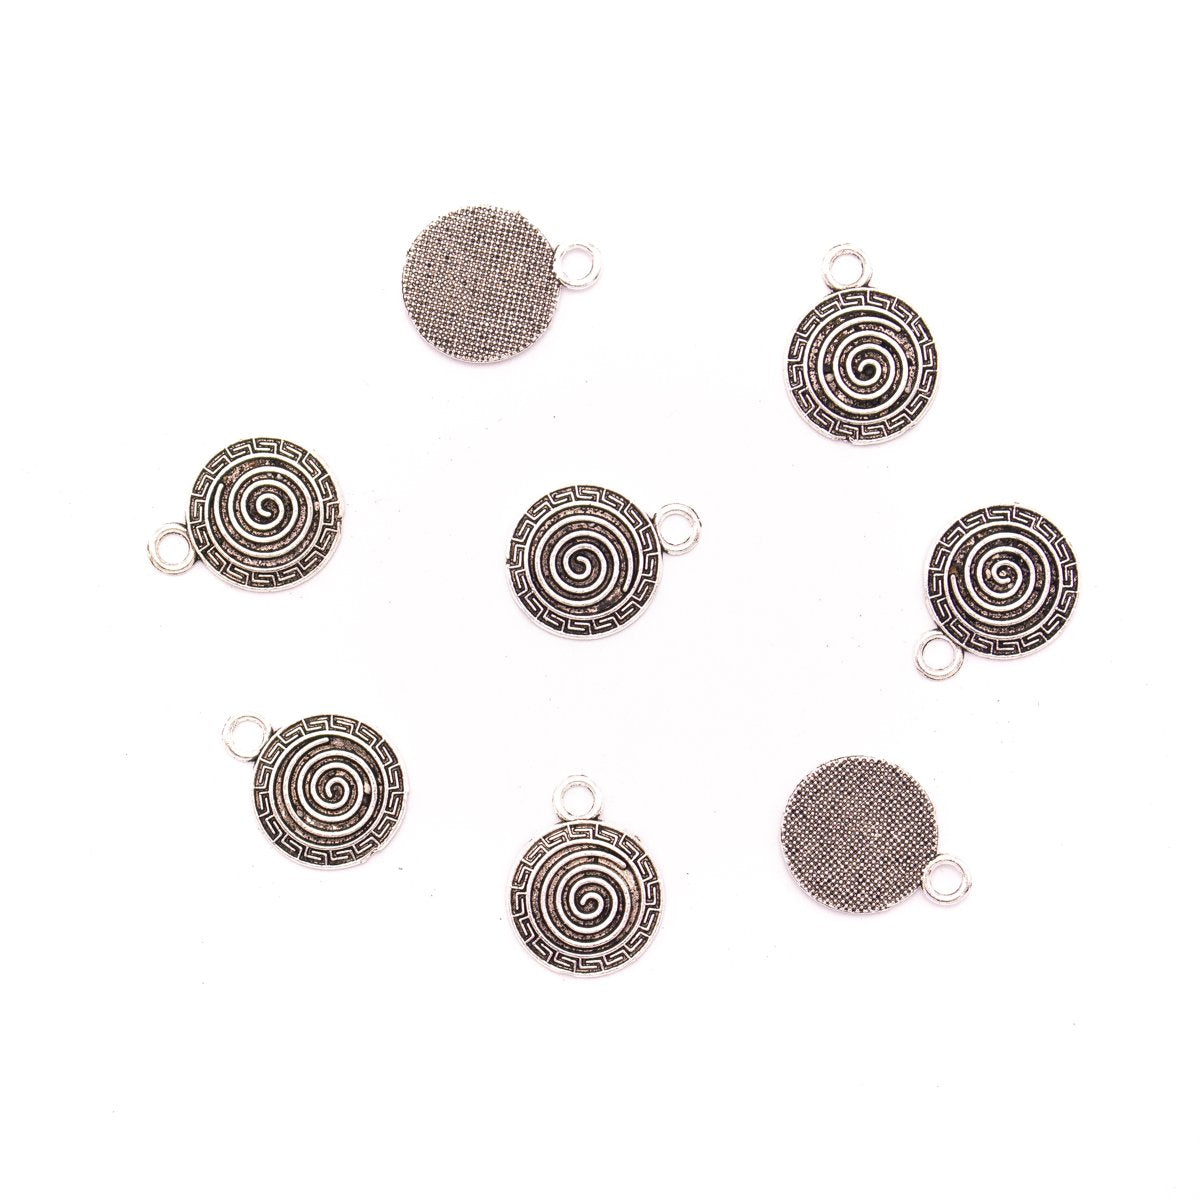 10 units 18x18mm Pendant antique silver Spiral jewelry pendant Jewelry Findings & Components D-3-415